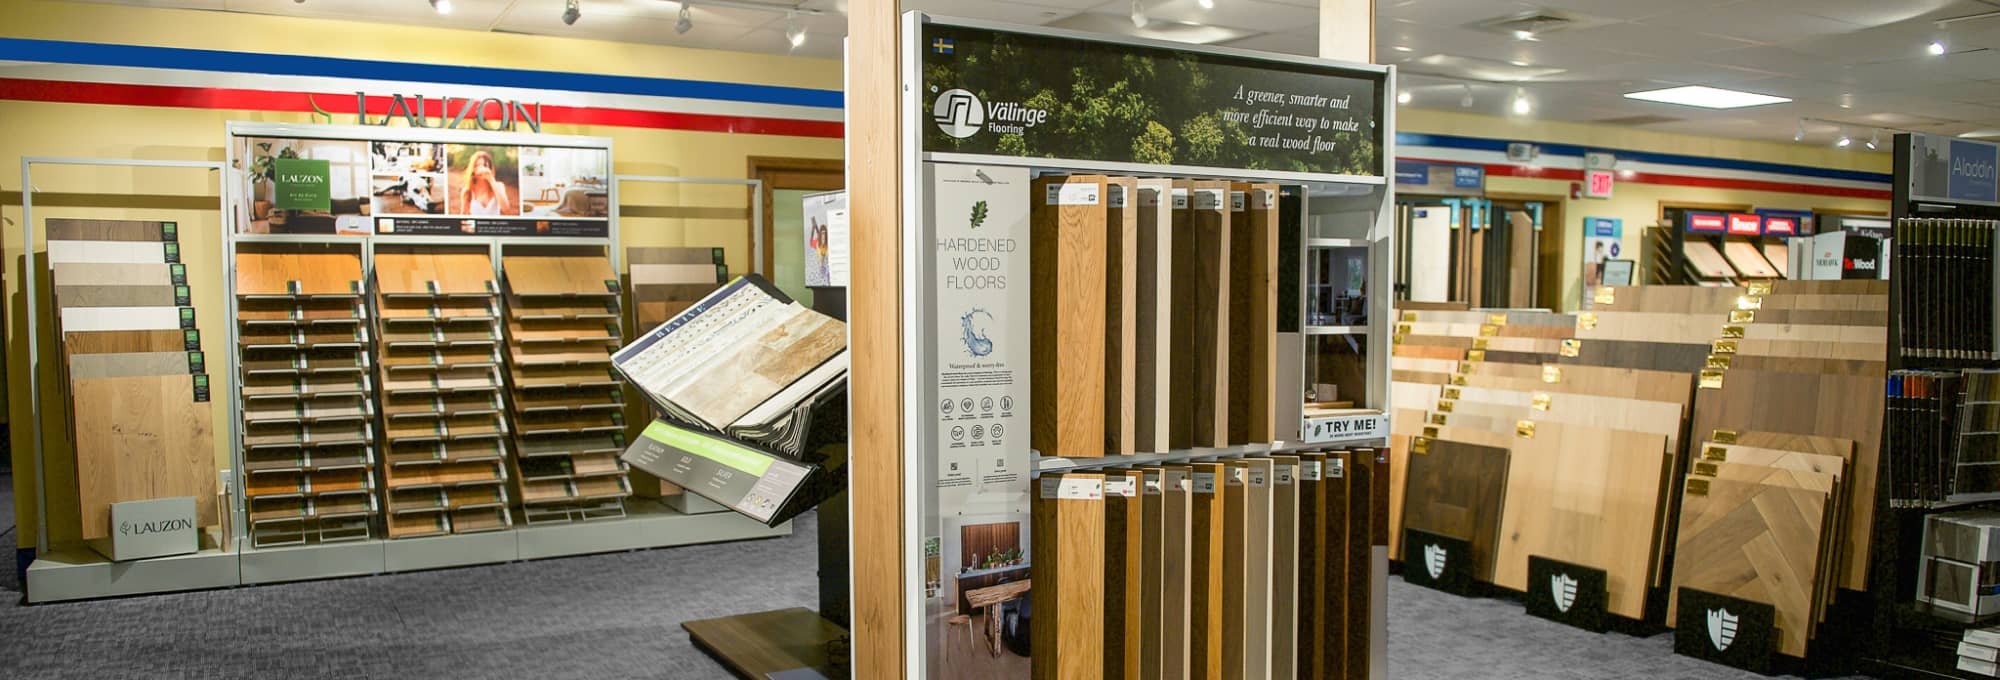 The Gallery at Smart Carpet is a flooring store serving the Manasquan, NJ area with a wide variety of flooring brands